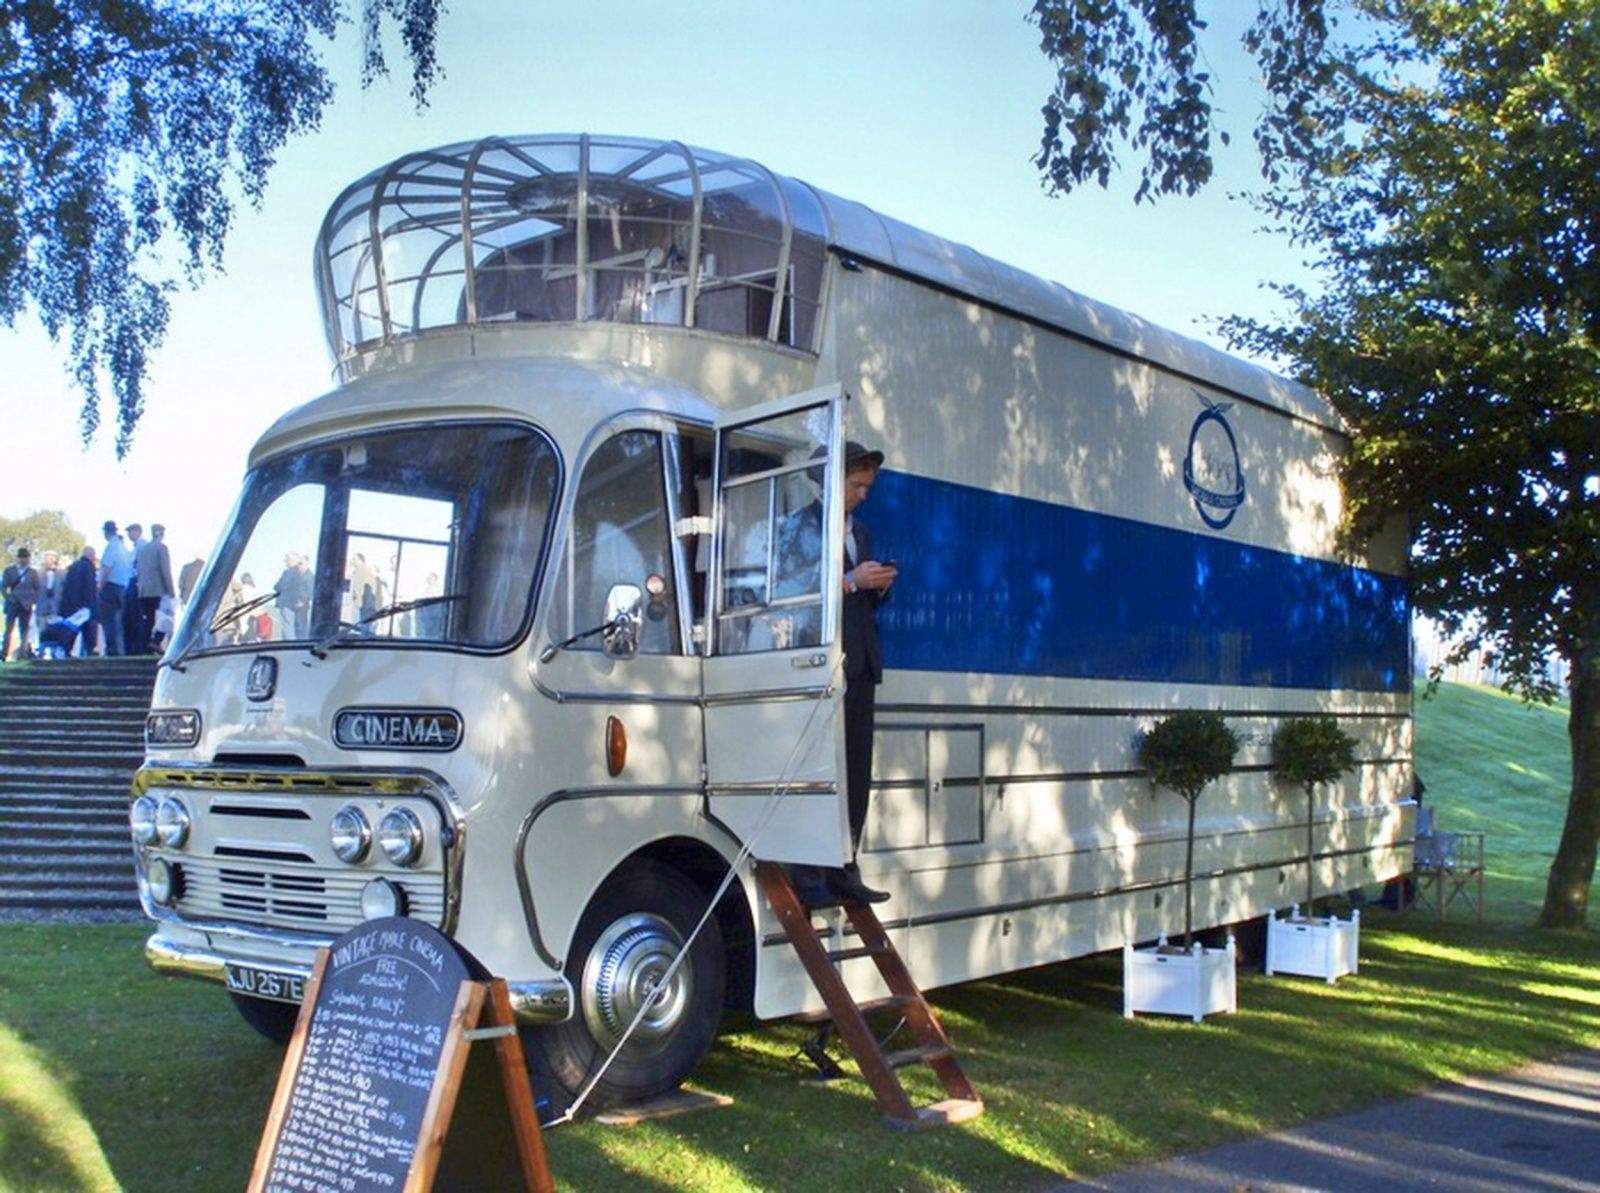 Britain's last mobile cinema, one of seven buses built by the government in the 1960s to promote modern manufacturing, is for sale on eBay. Photo: Jane Sanders